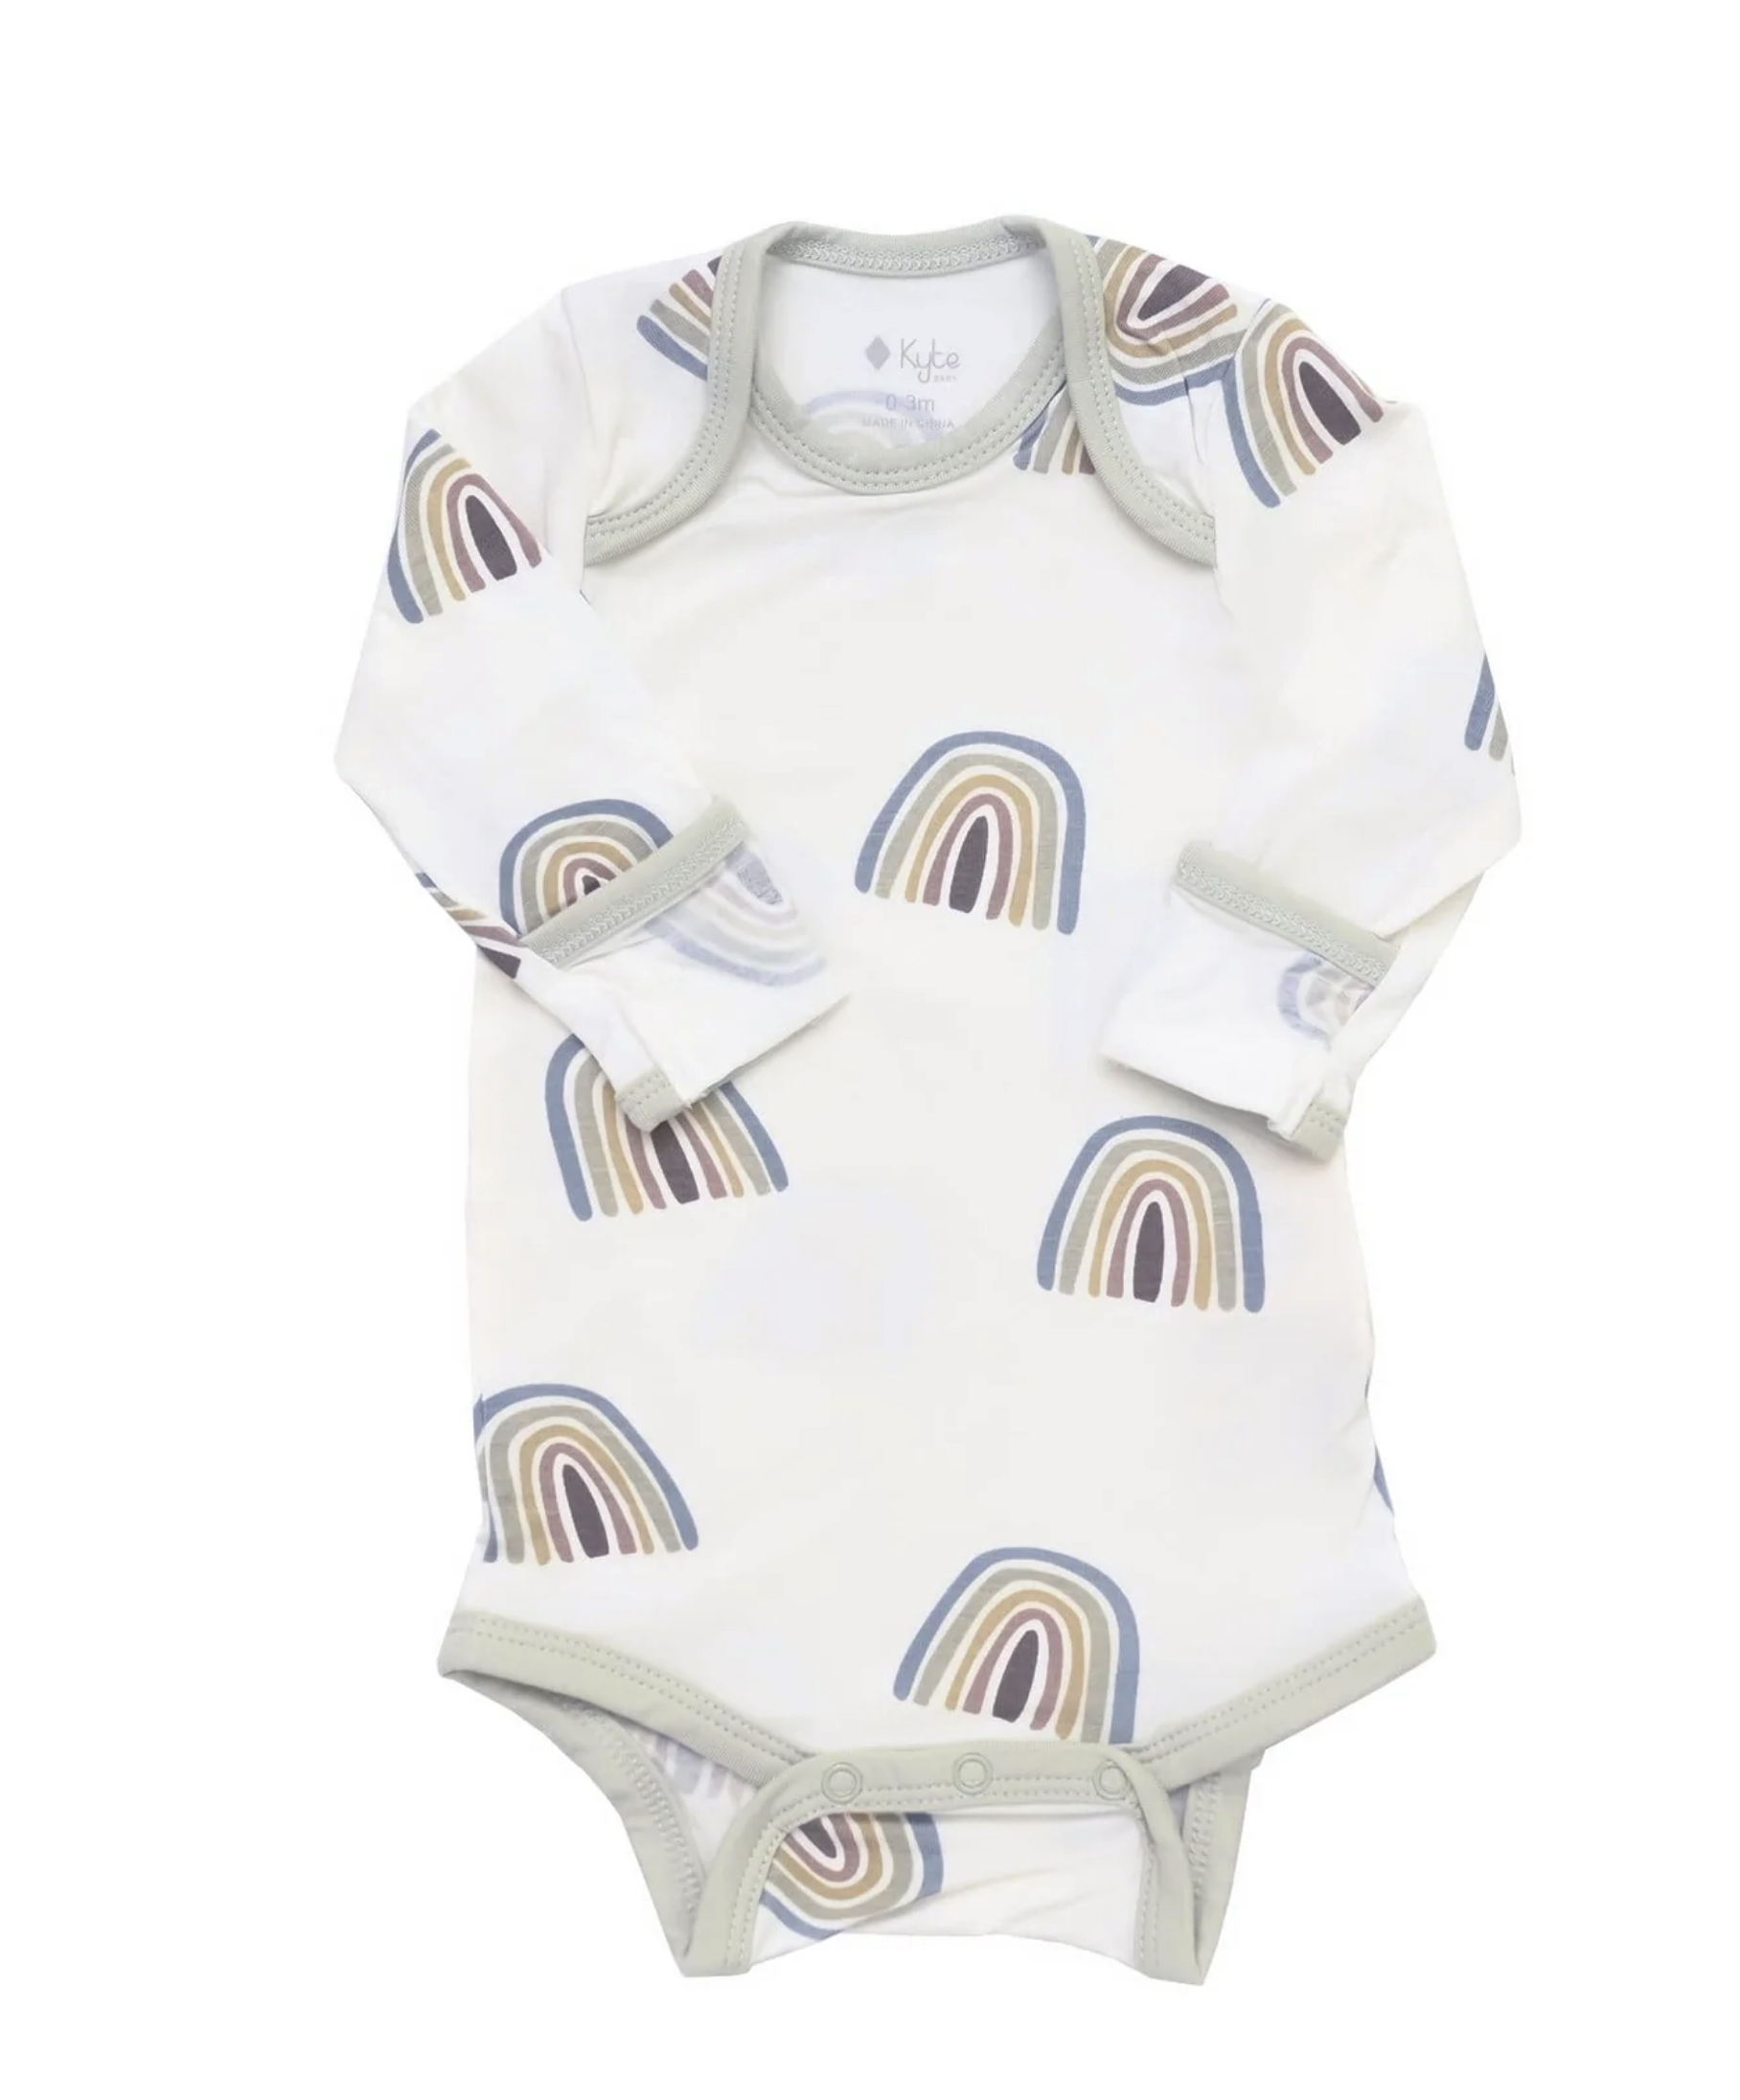 Best Baby Clothing Brands Kyte rainbow long sleeve body suite